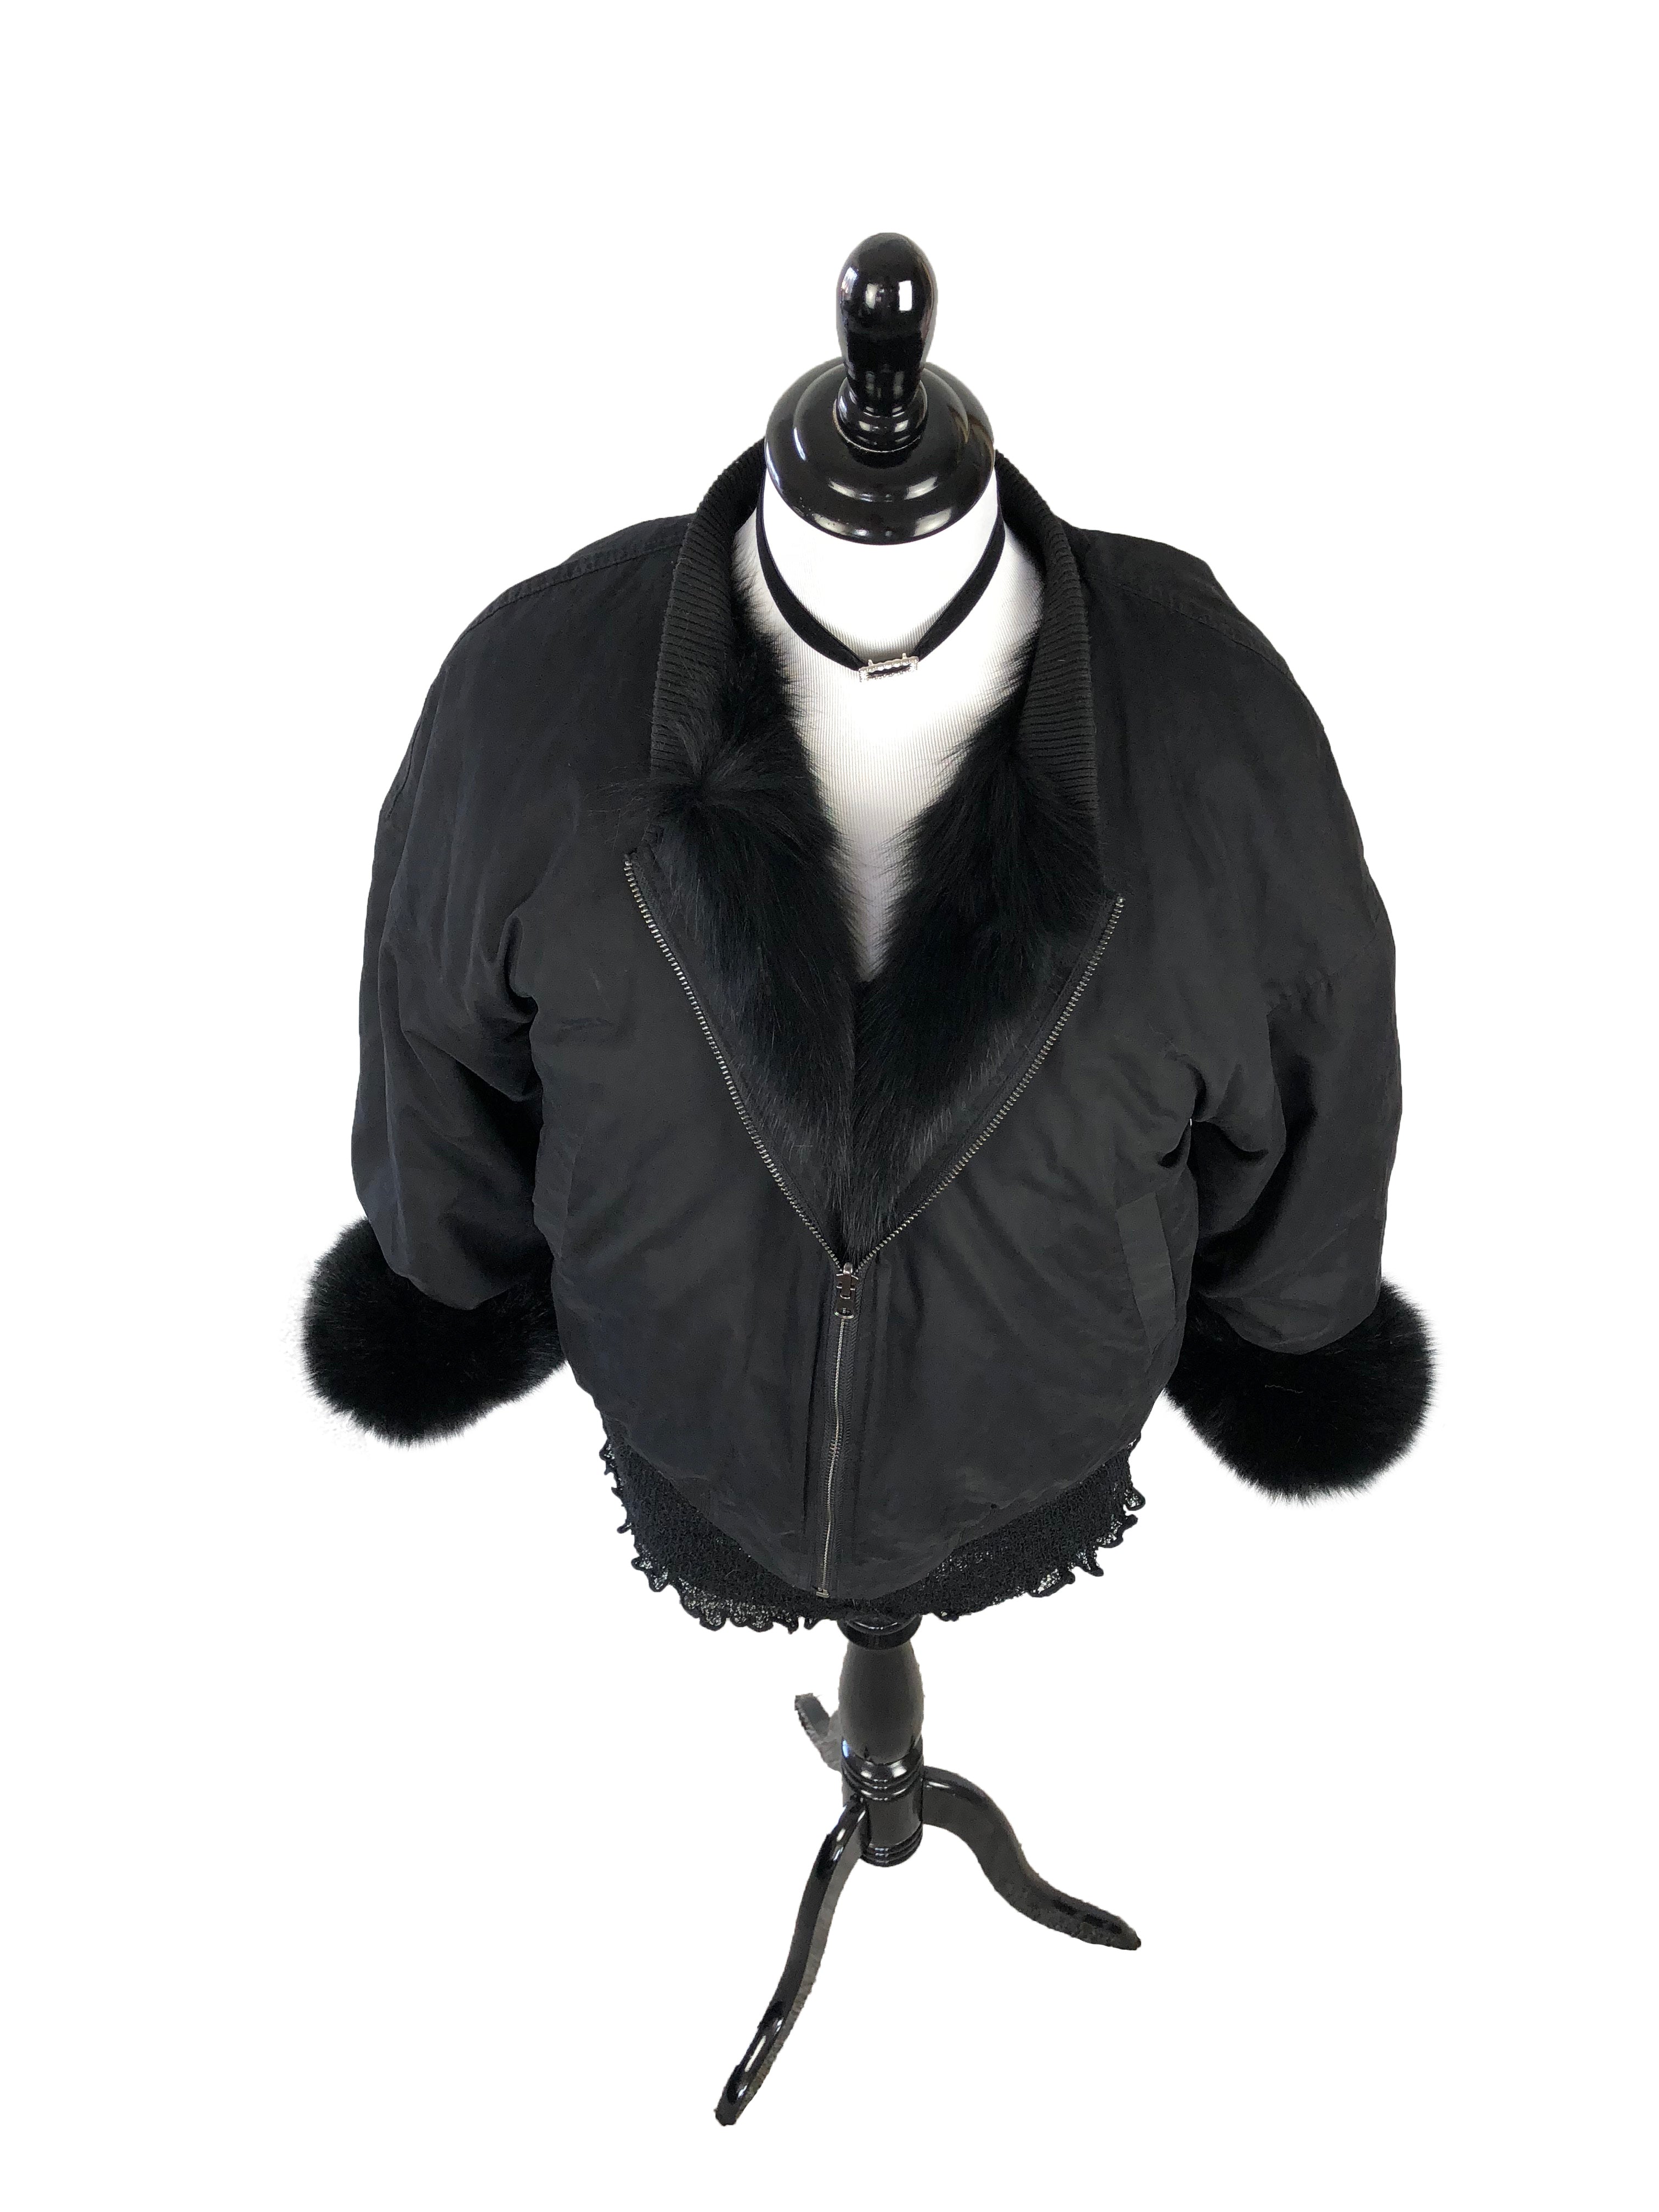 Winter Jacket with Fox Fur Lining and Cuffs - paulamariecollection